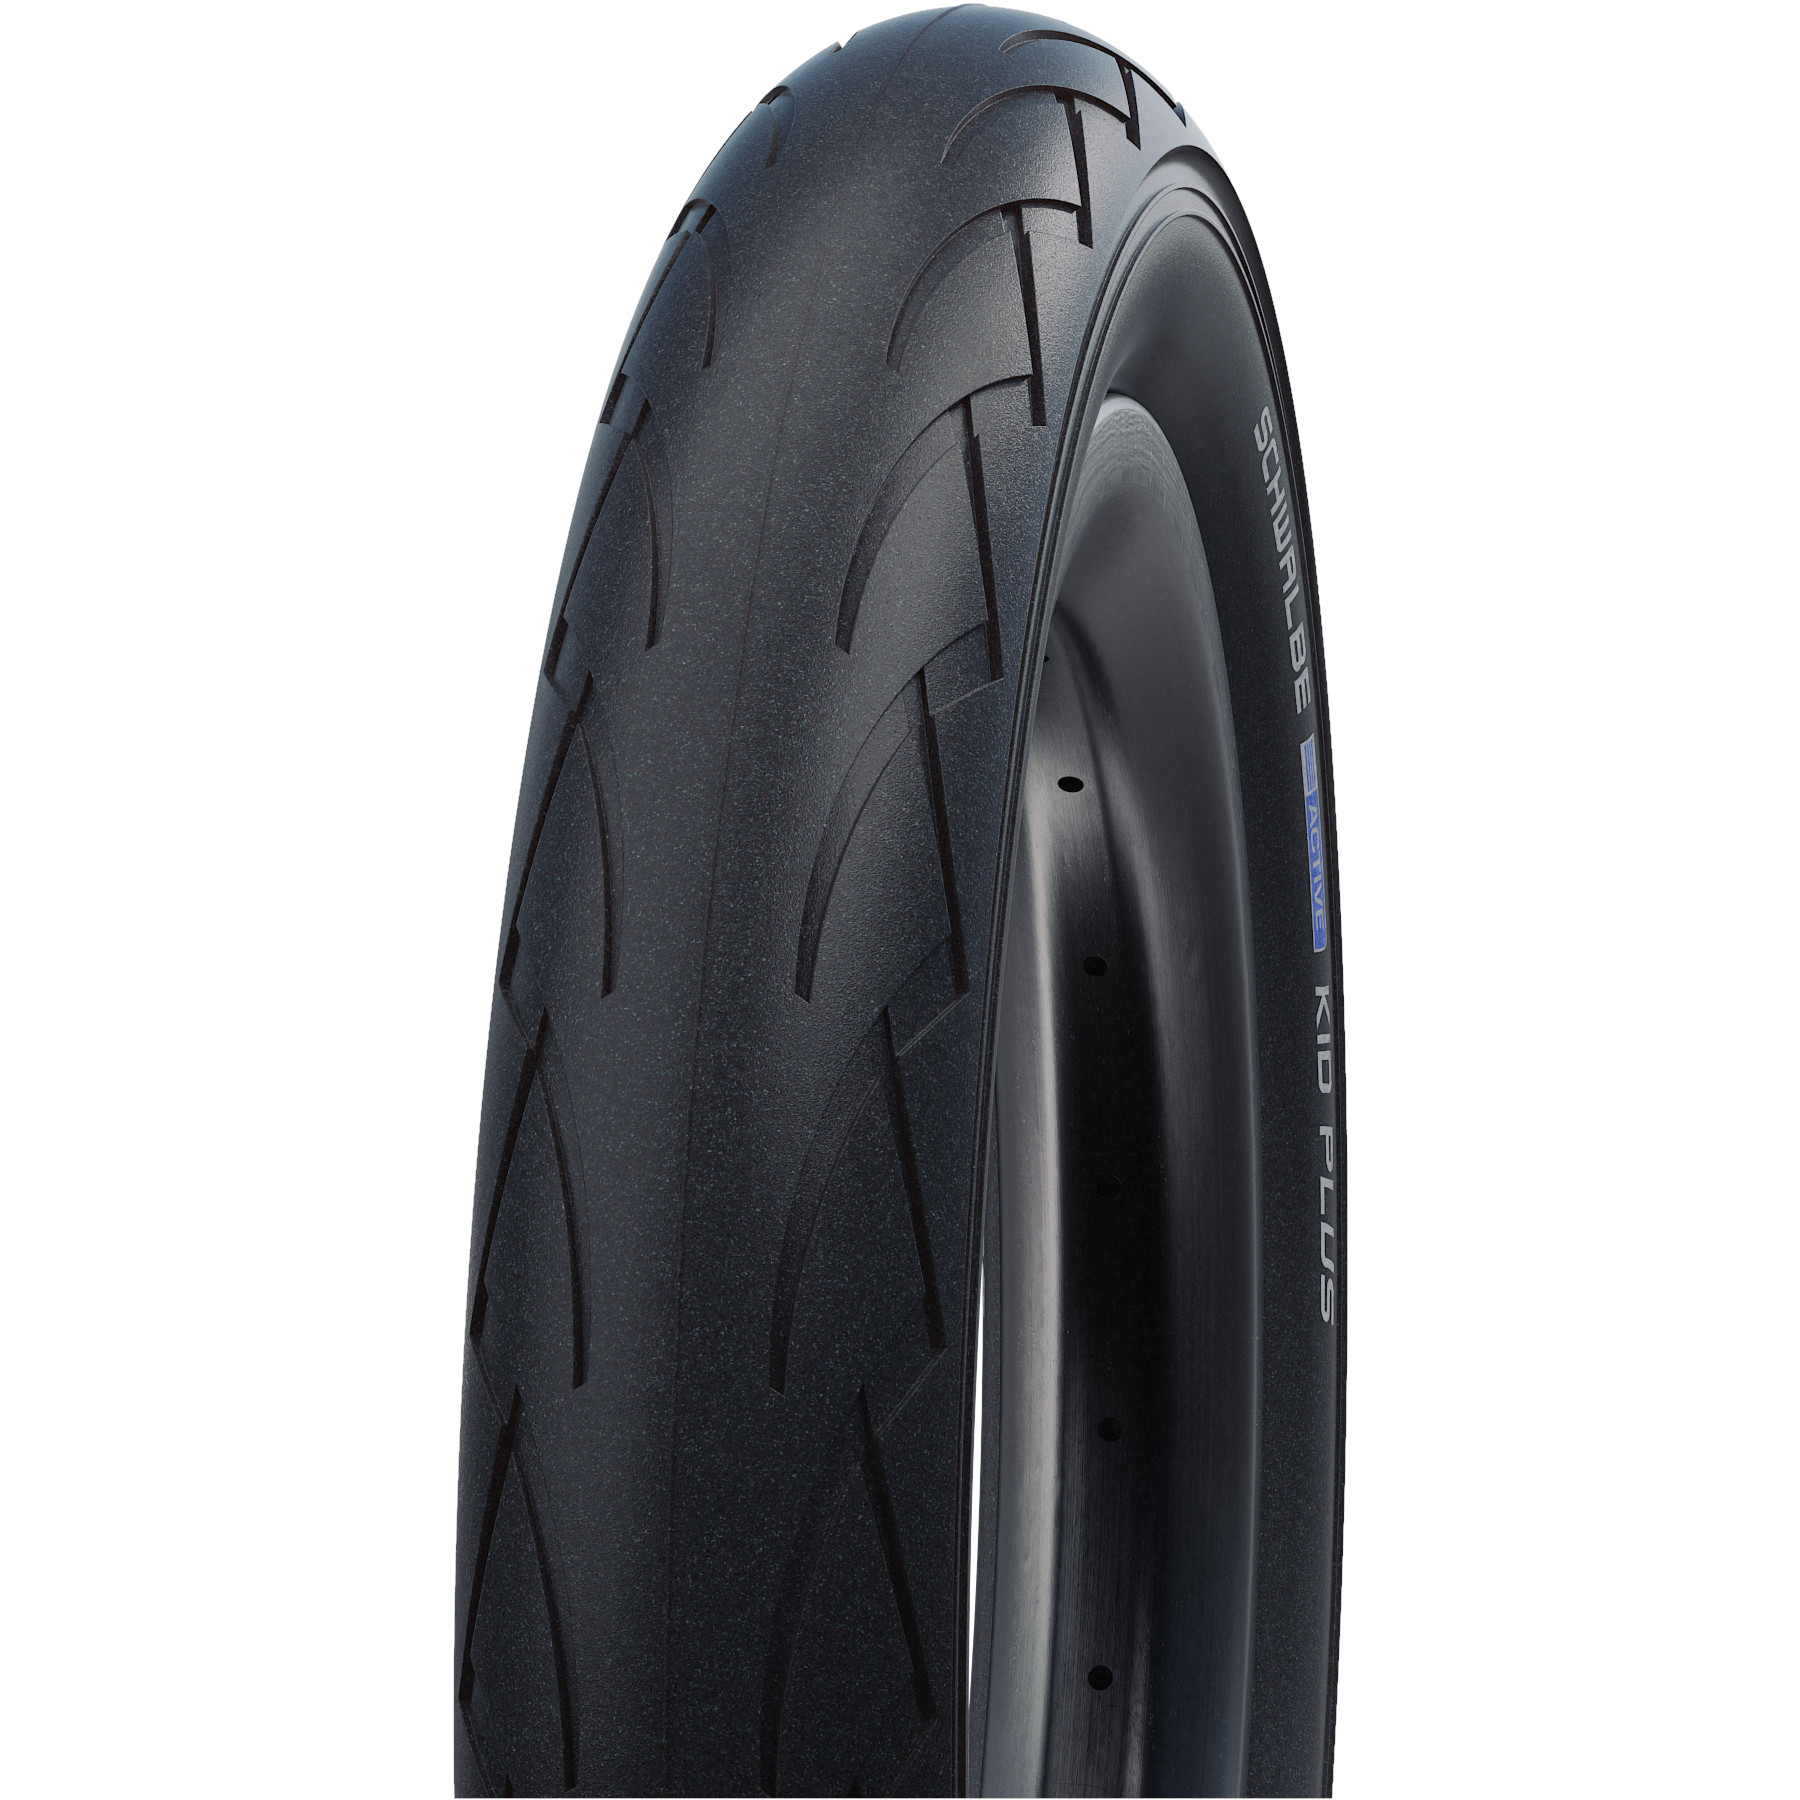 Image of Schwalbe Kid Plus Wire Bead Tire - Active | Black 'n' Roll | Puncture Guard - 14x1.75" | Black